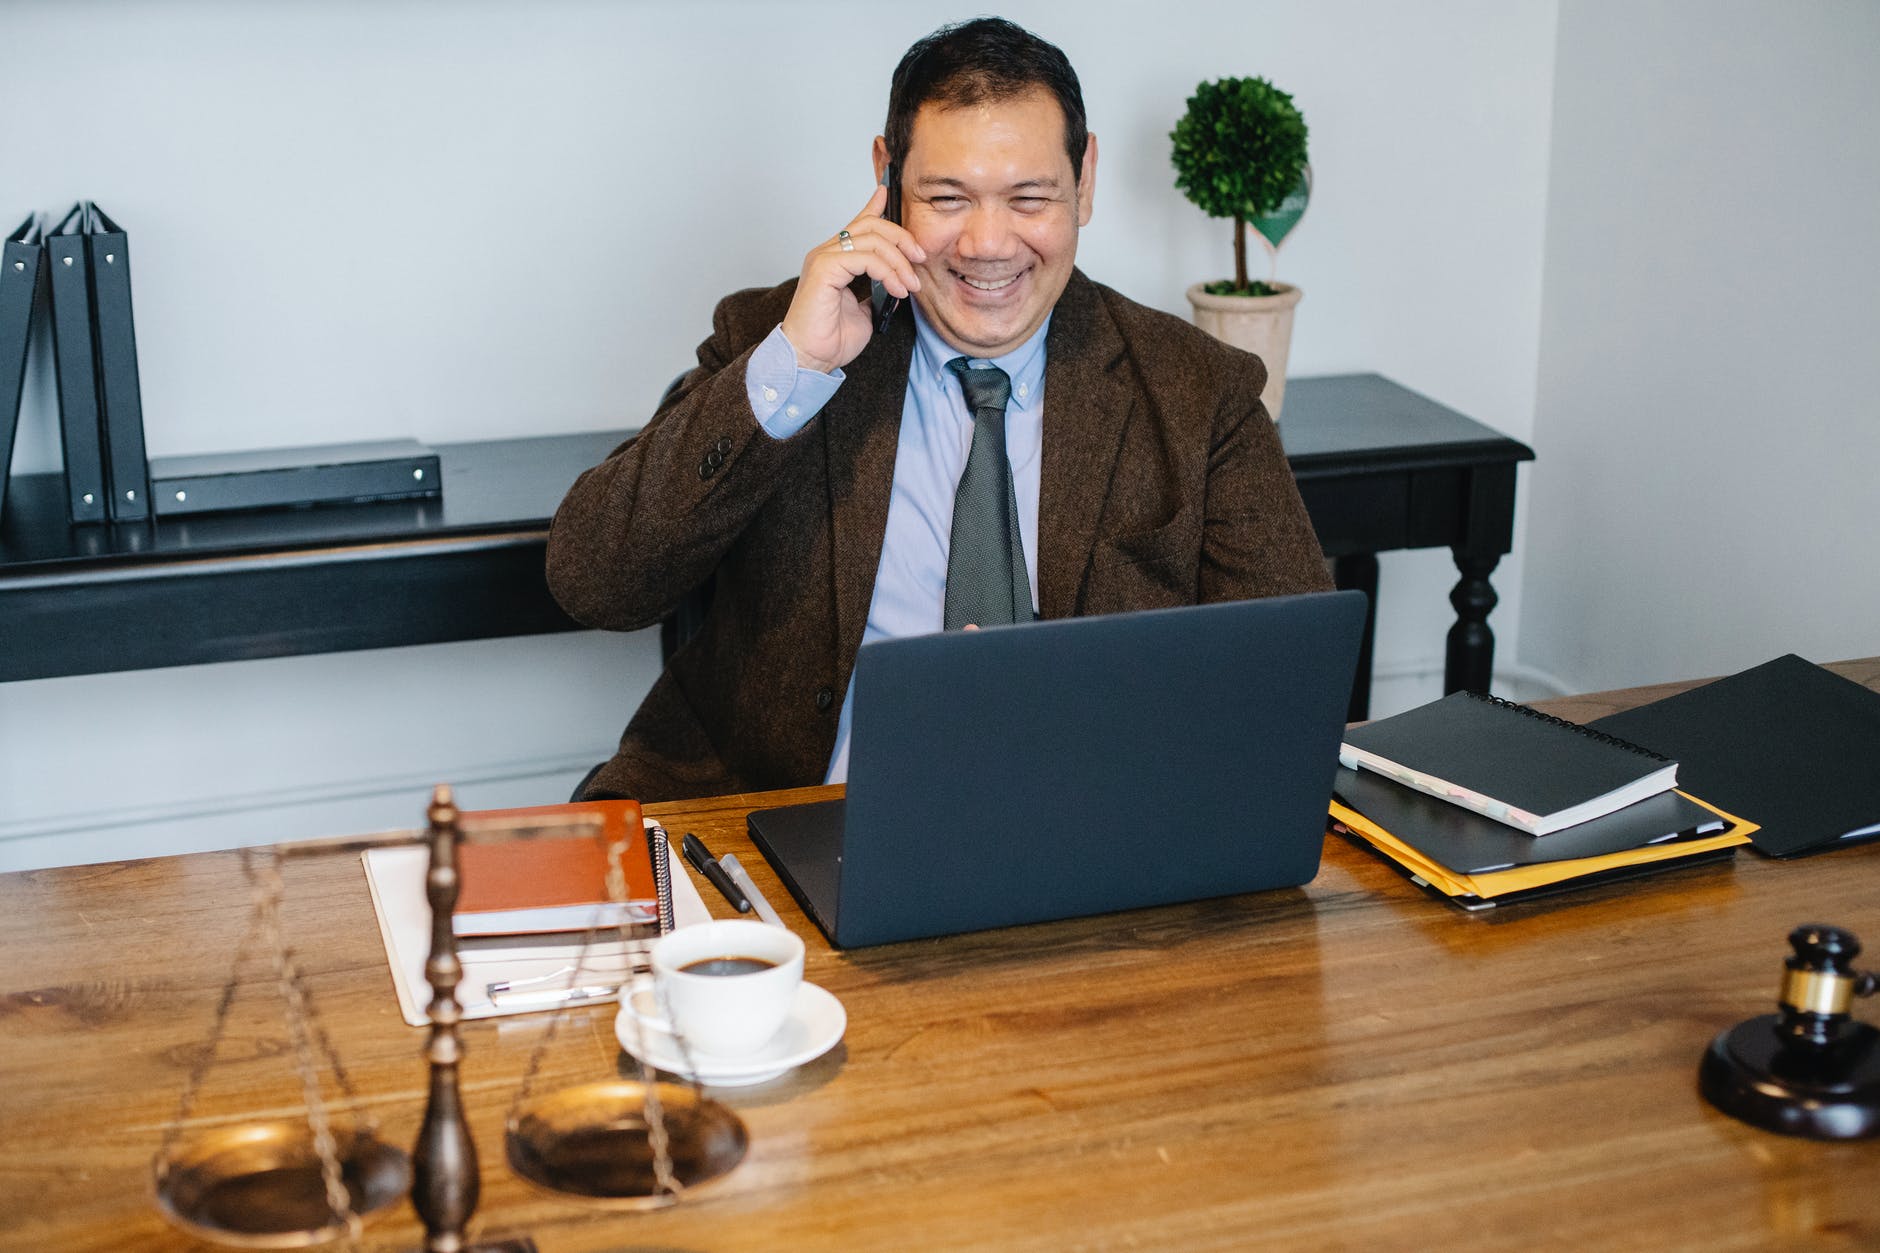 man smiling while using cellphone in office